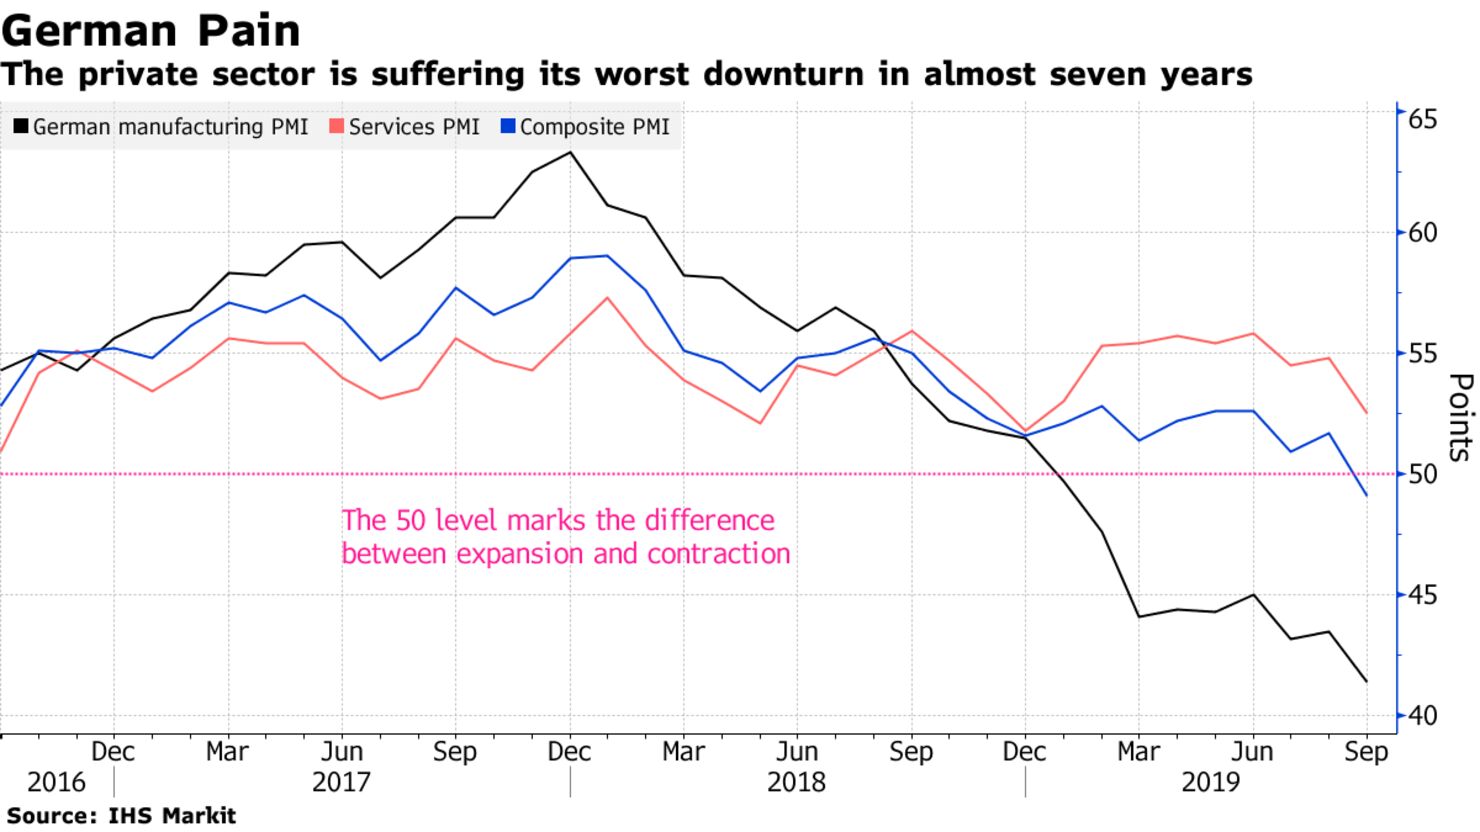 The private sector is suffering its worst downturn in almost seven years